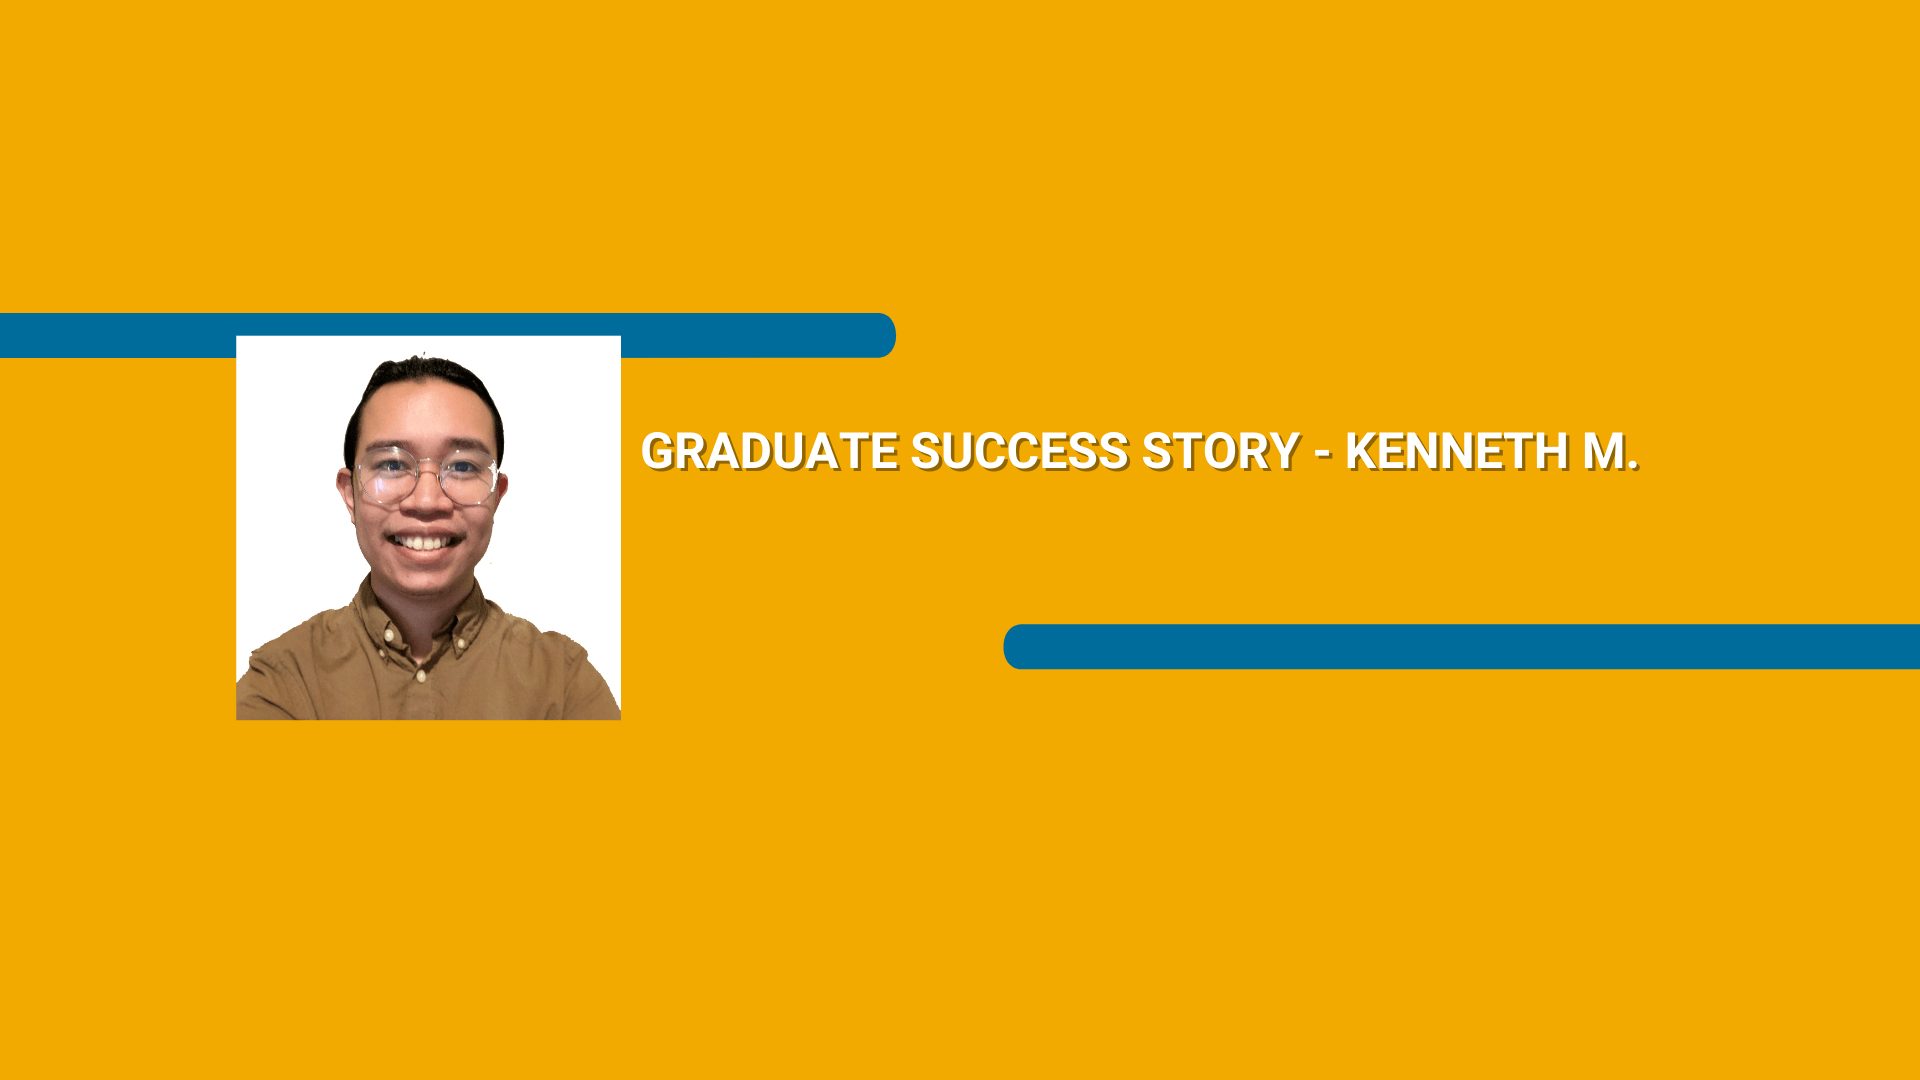 Orange rectangle with a picture of a man wearing a shirt and Graduate Success Story - Kenneth M. text in white font